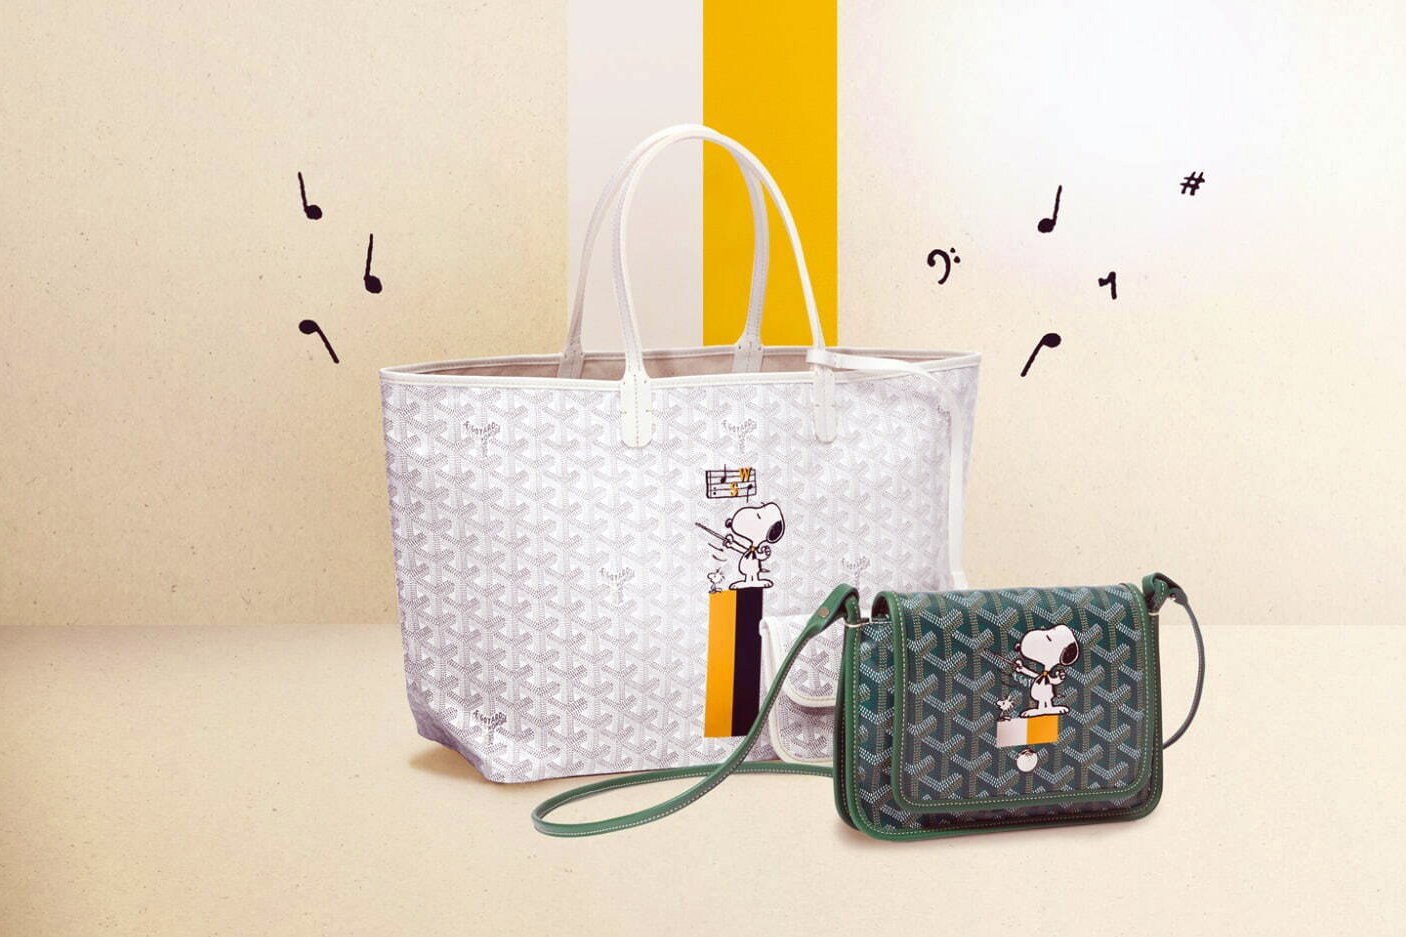 Goyard Bag Prices: All The Information You Need